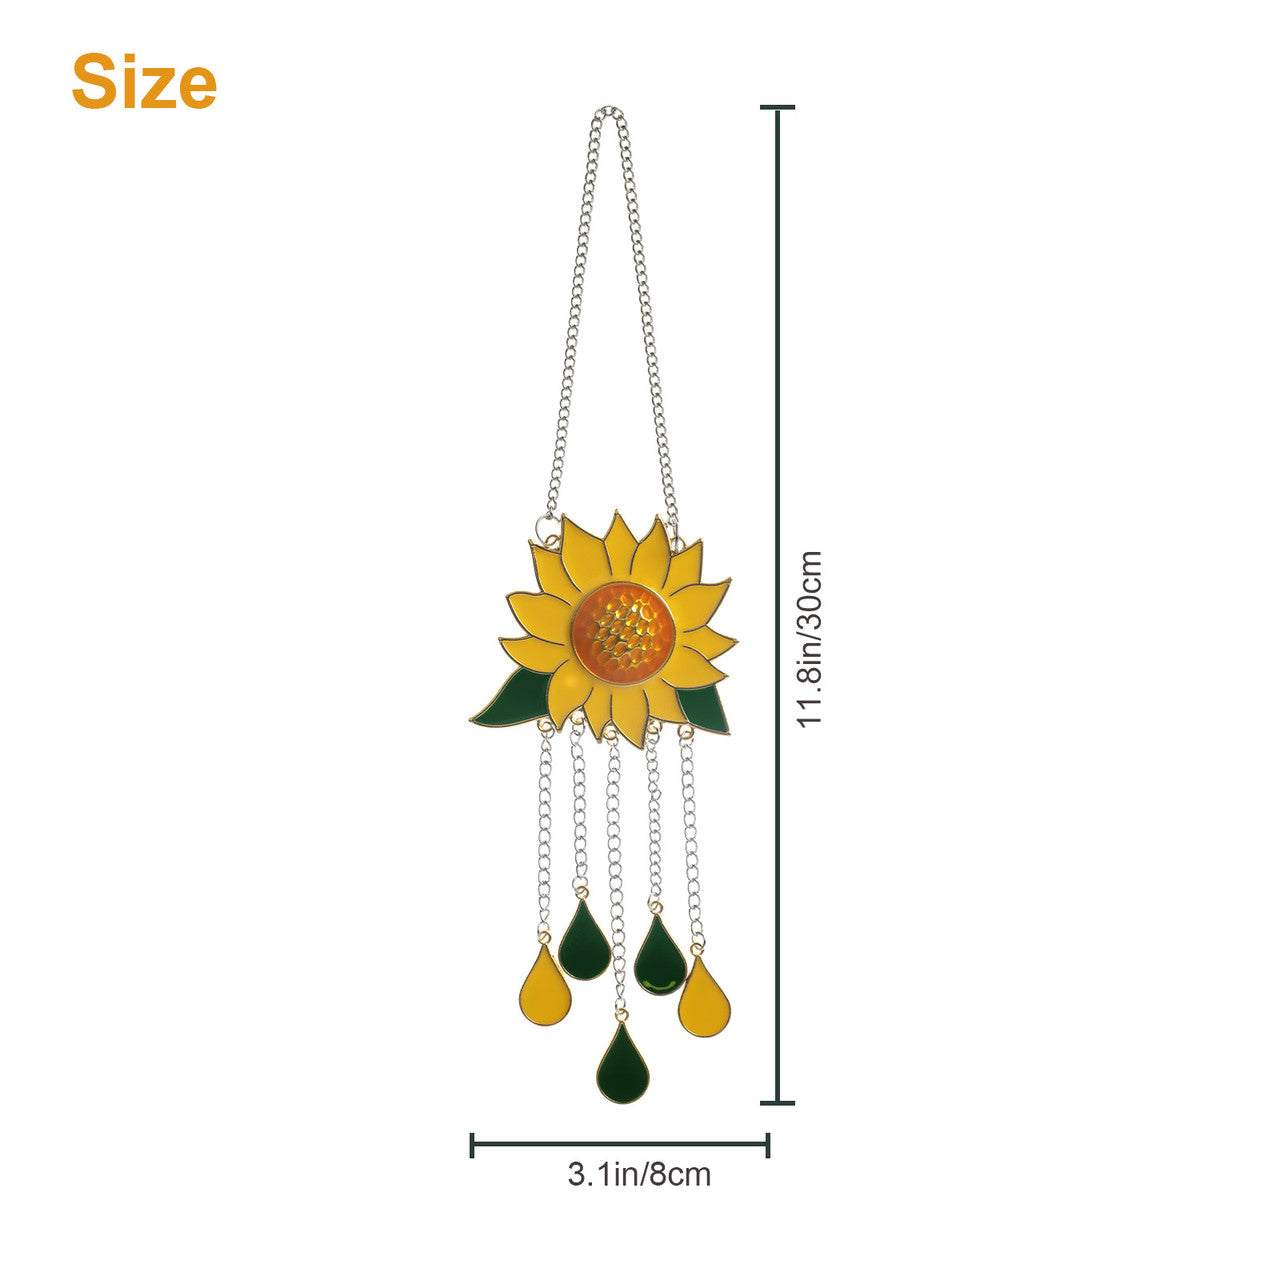 Unique Sunflower Decoration Pendant for Health and Happiness